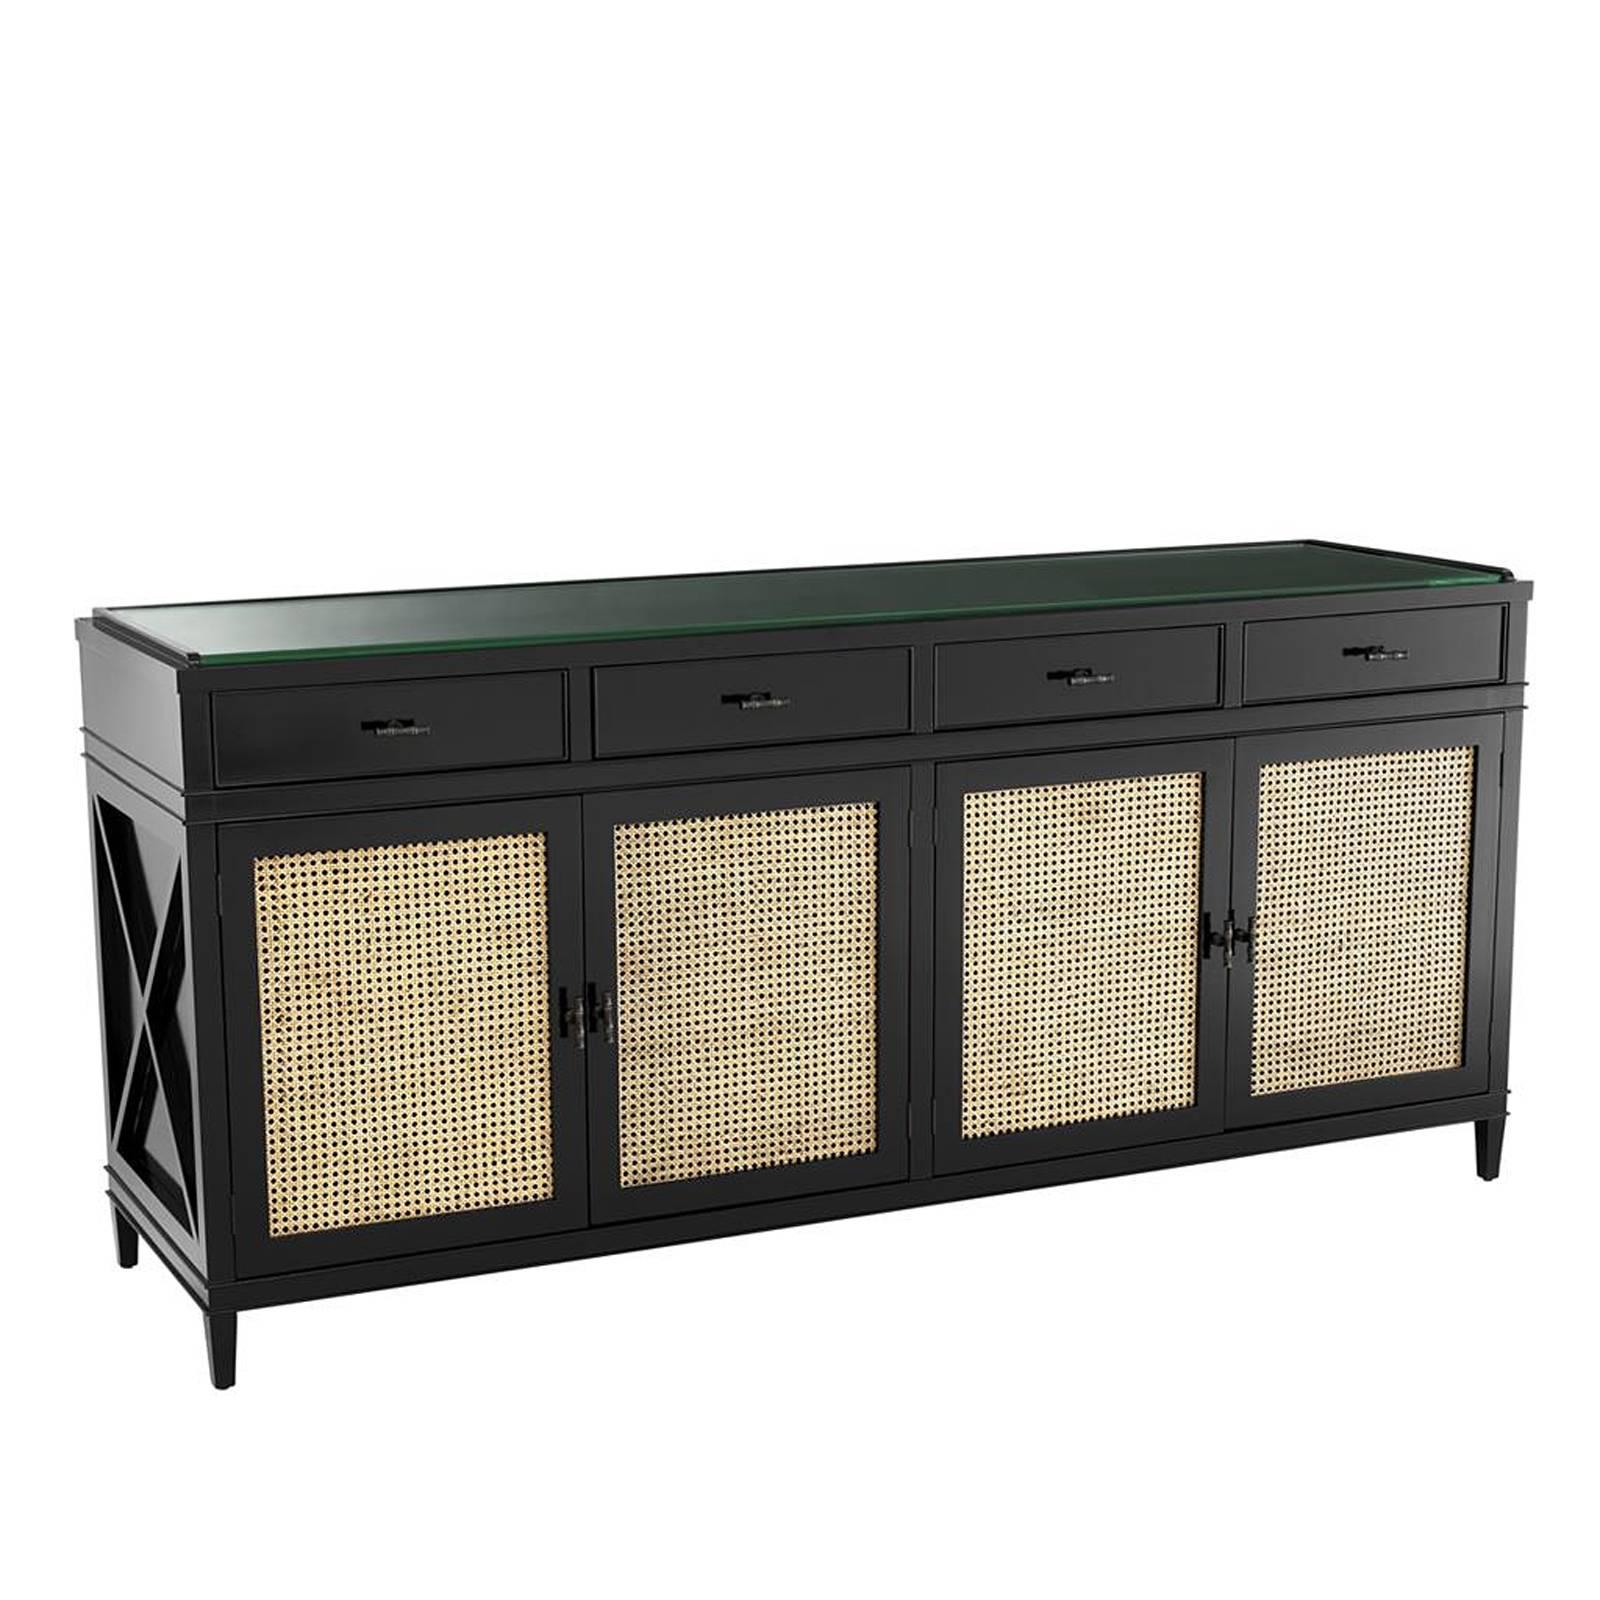 Indonesian Evora Sideboard in Black Lacquered Solid Mahogany Wood